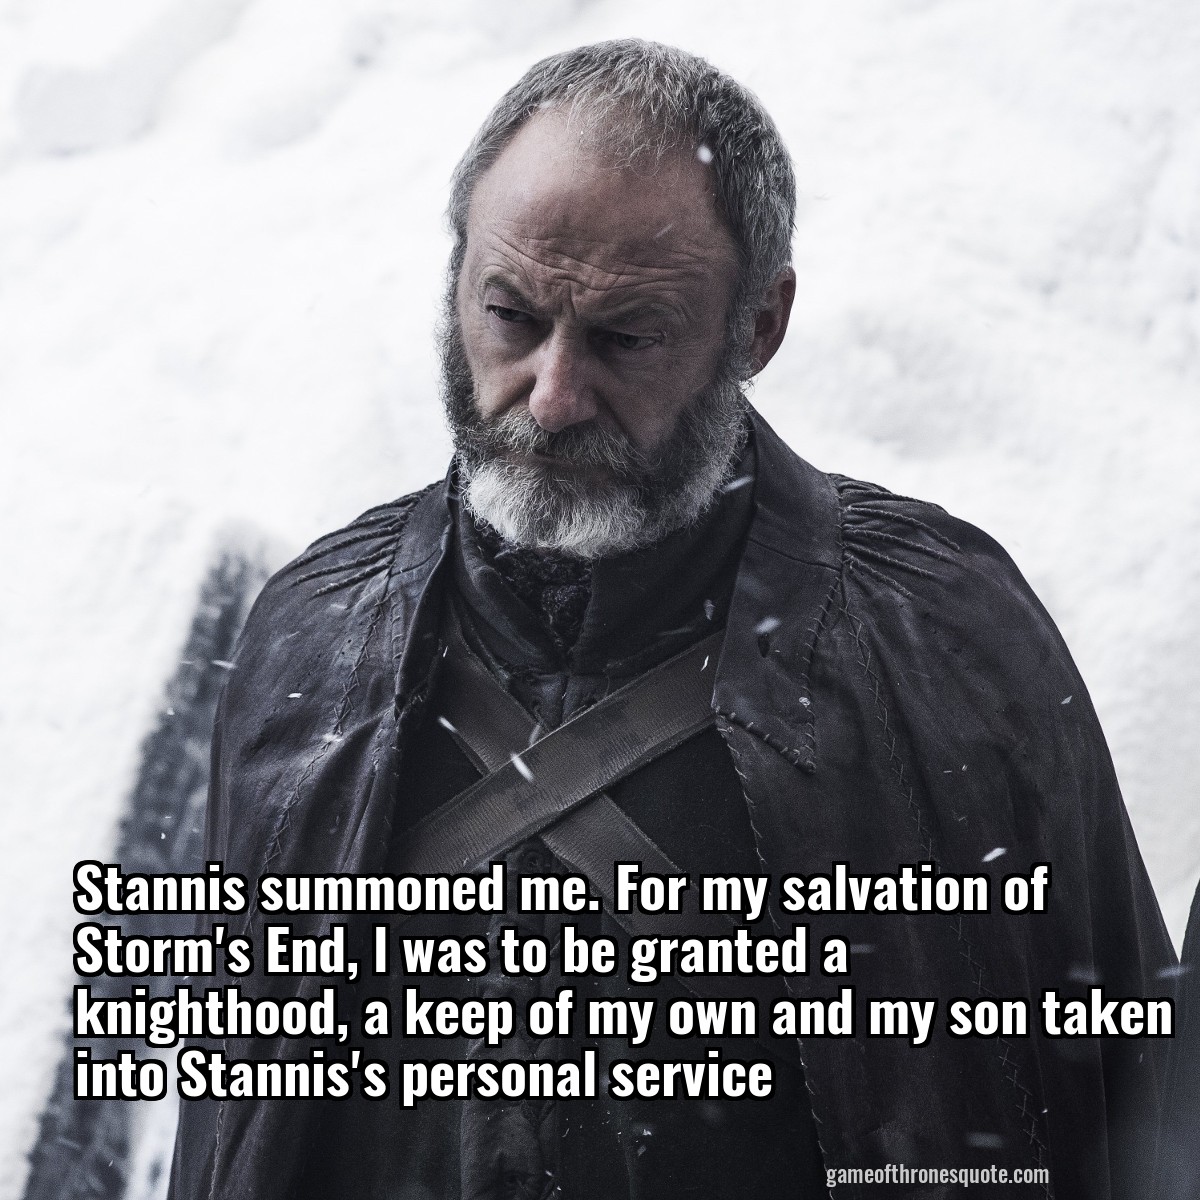 Stannis summoned me. For my salvation of Storm's End, l was to be granted a knighthood, a keep of my own and my son taken into Stannis's personal service